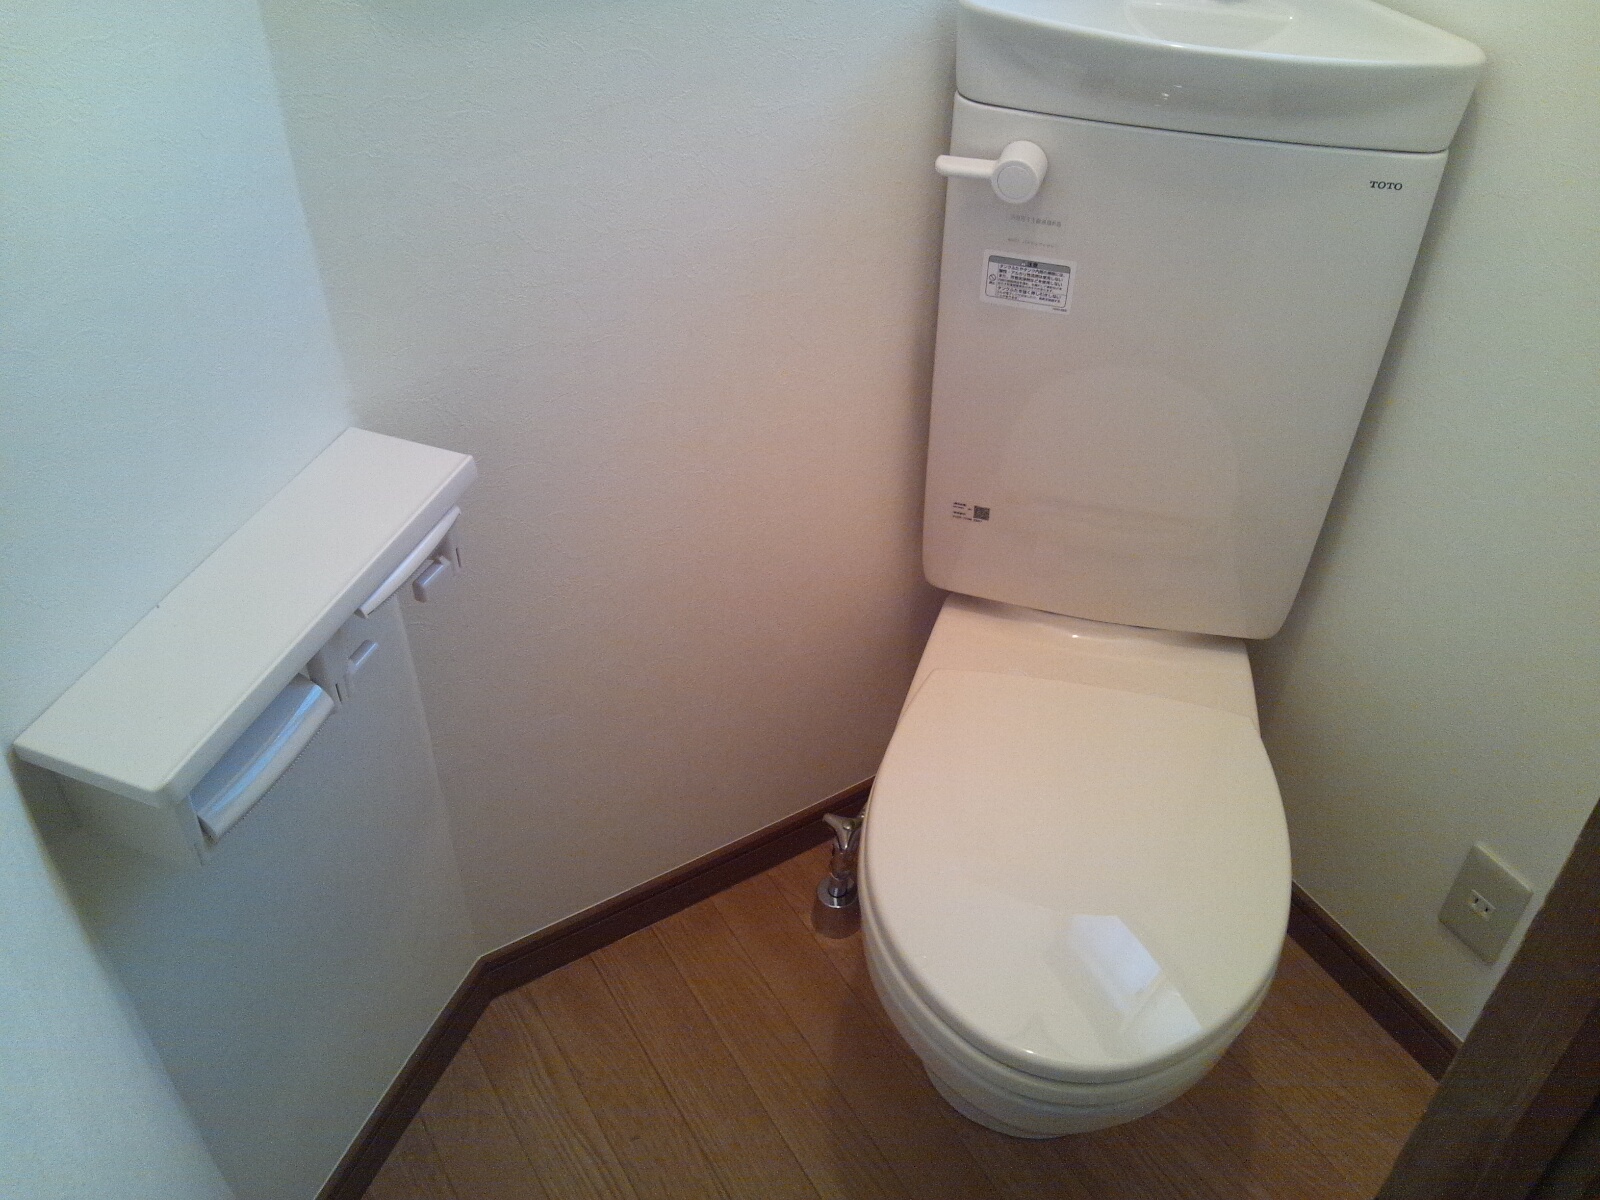 Toilet. It is a new article of the toilet (^ _ ^) v